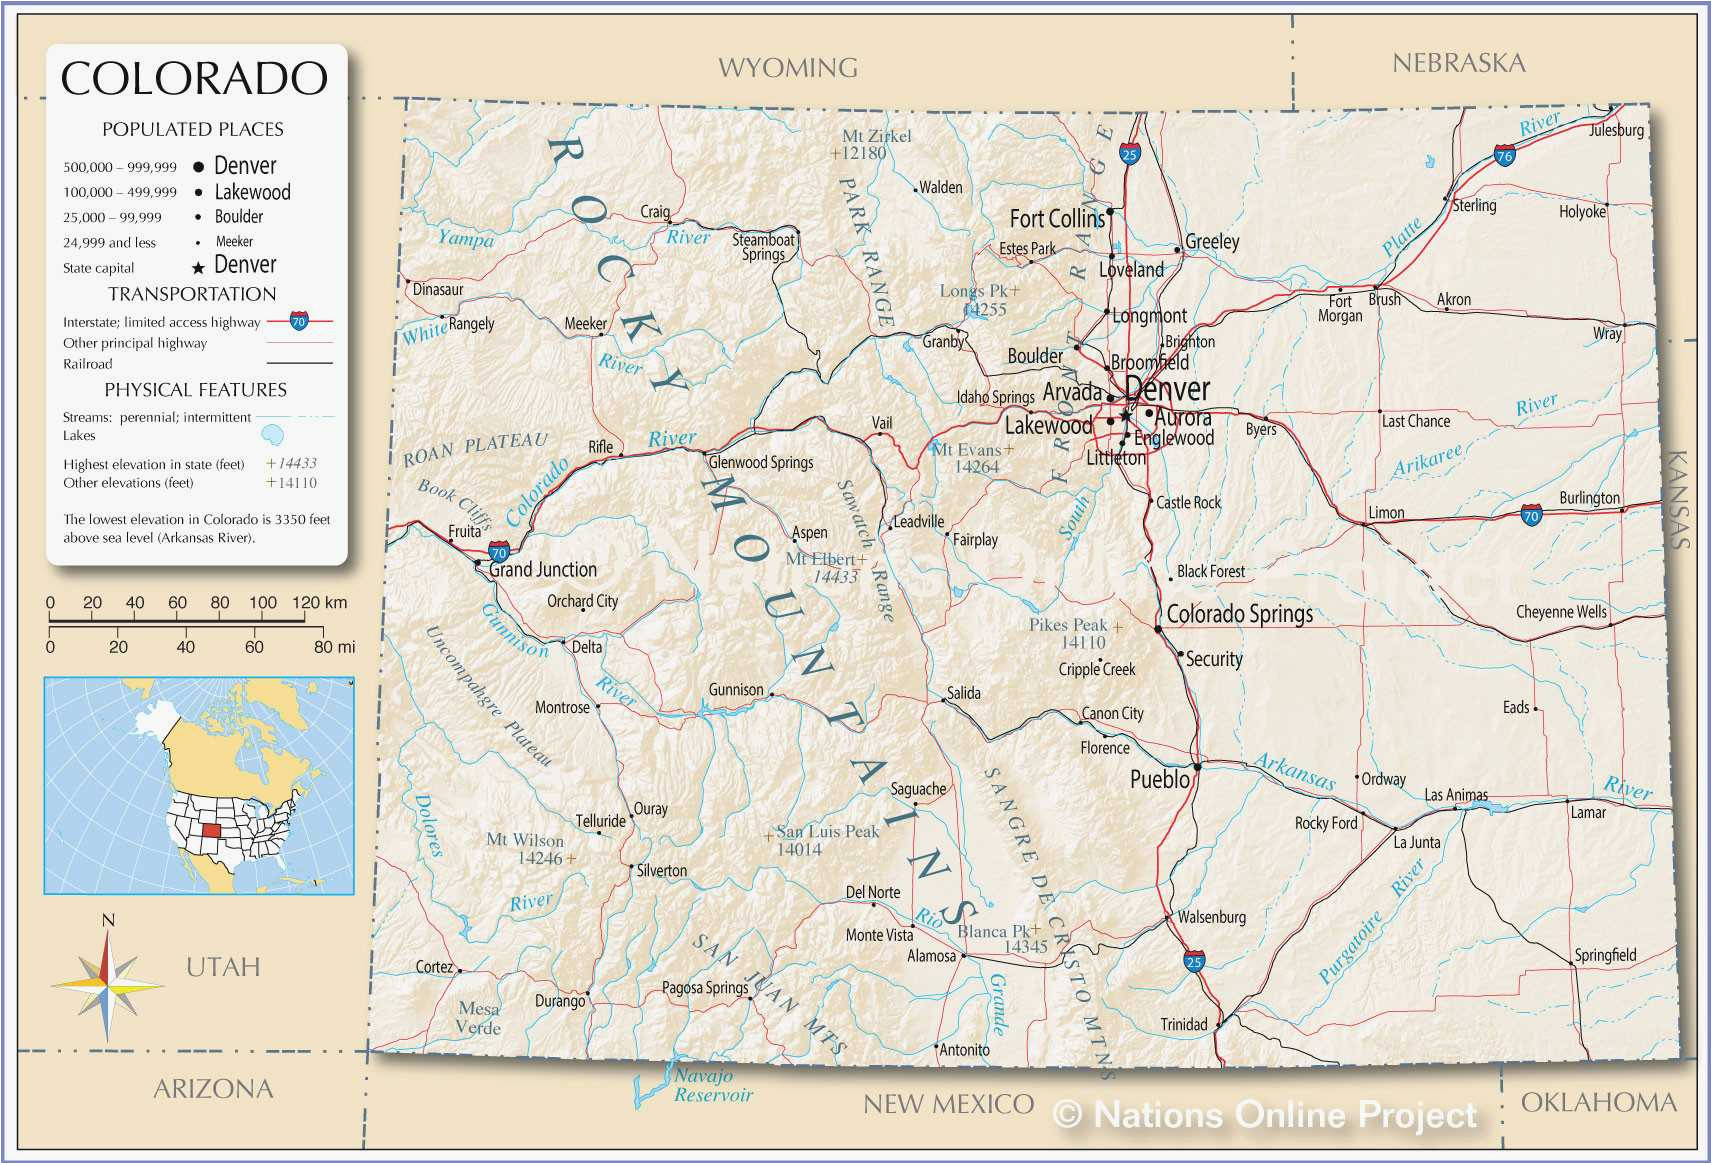 castle rock outlets map inspirational denver county map beautiful